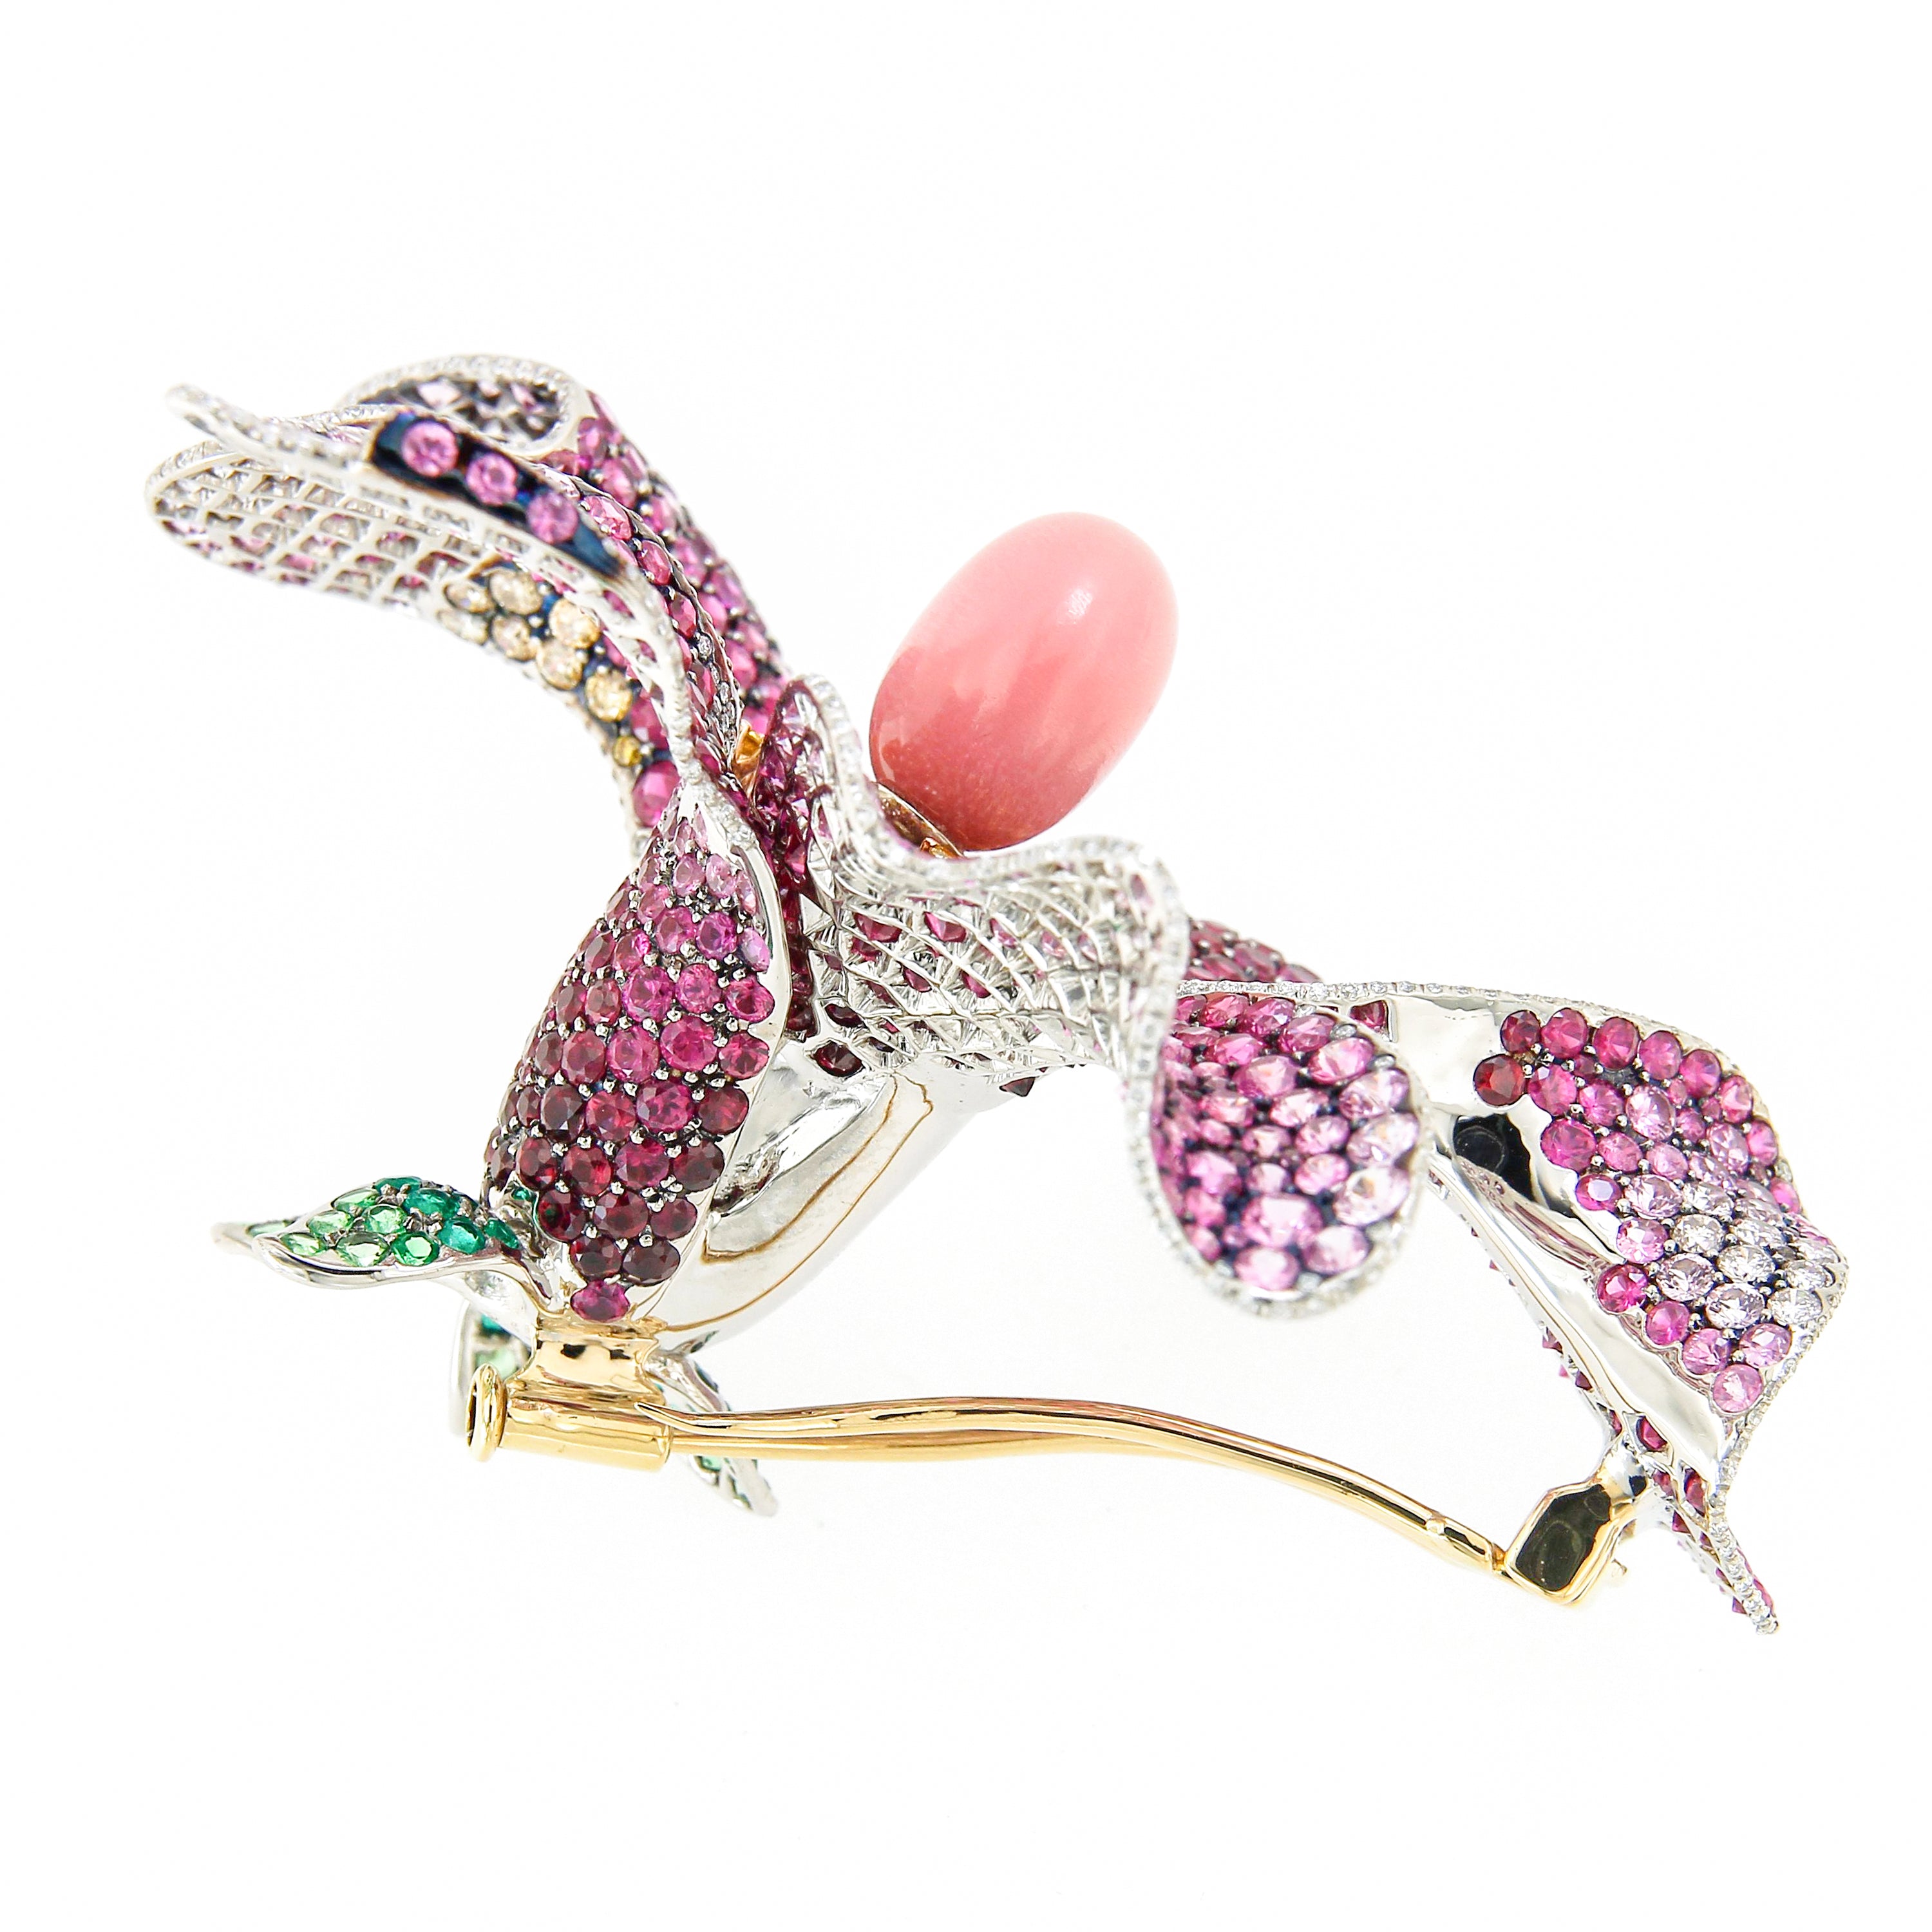 Brooch "Lilly" Yellow Gold and Palladium with Diamonds and Rubies and a Conch Pearl